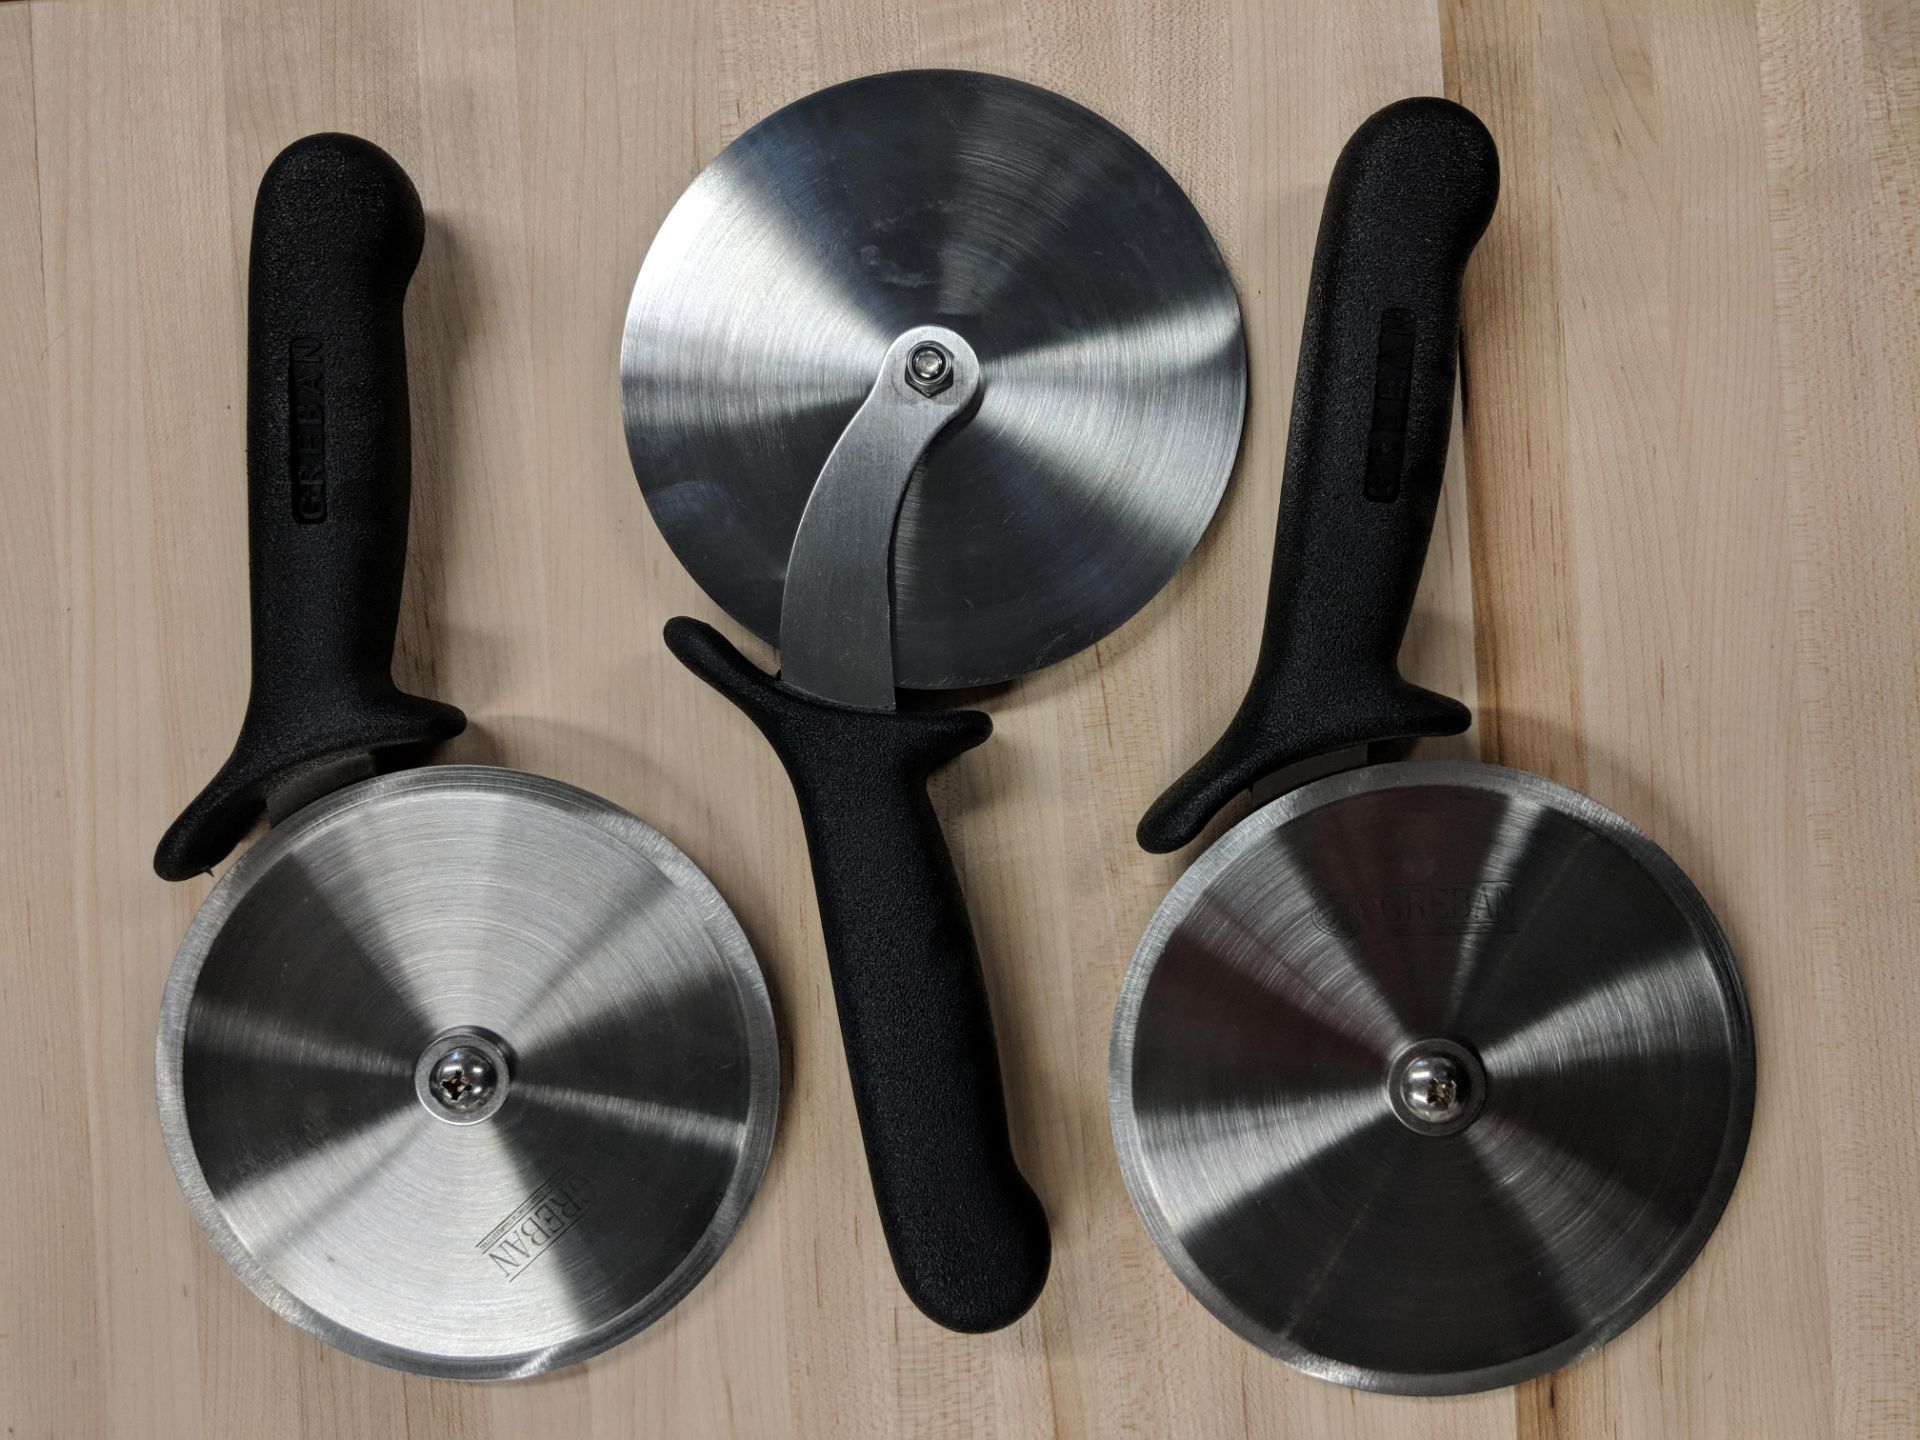 5” R-Style Pizza Cutters w/Black Handle - Lot of 3 - Image 4 of 7